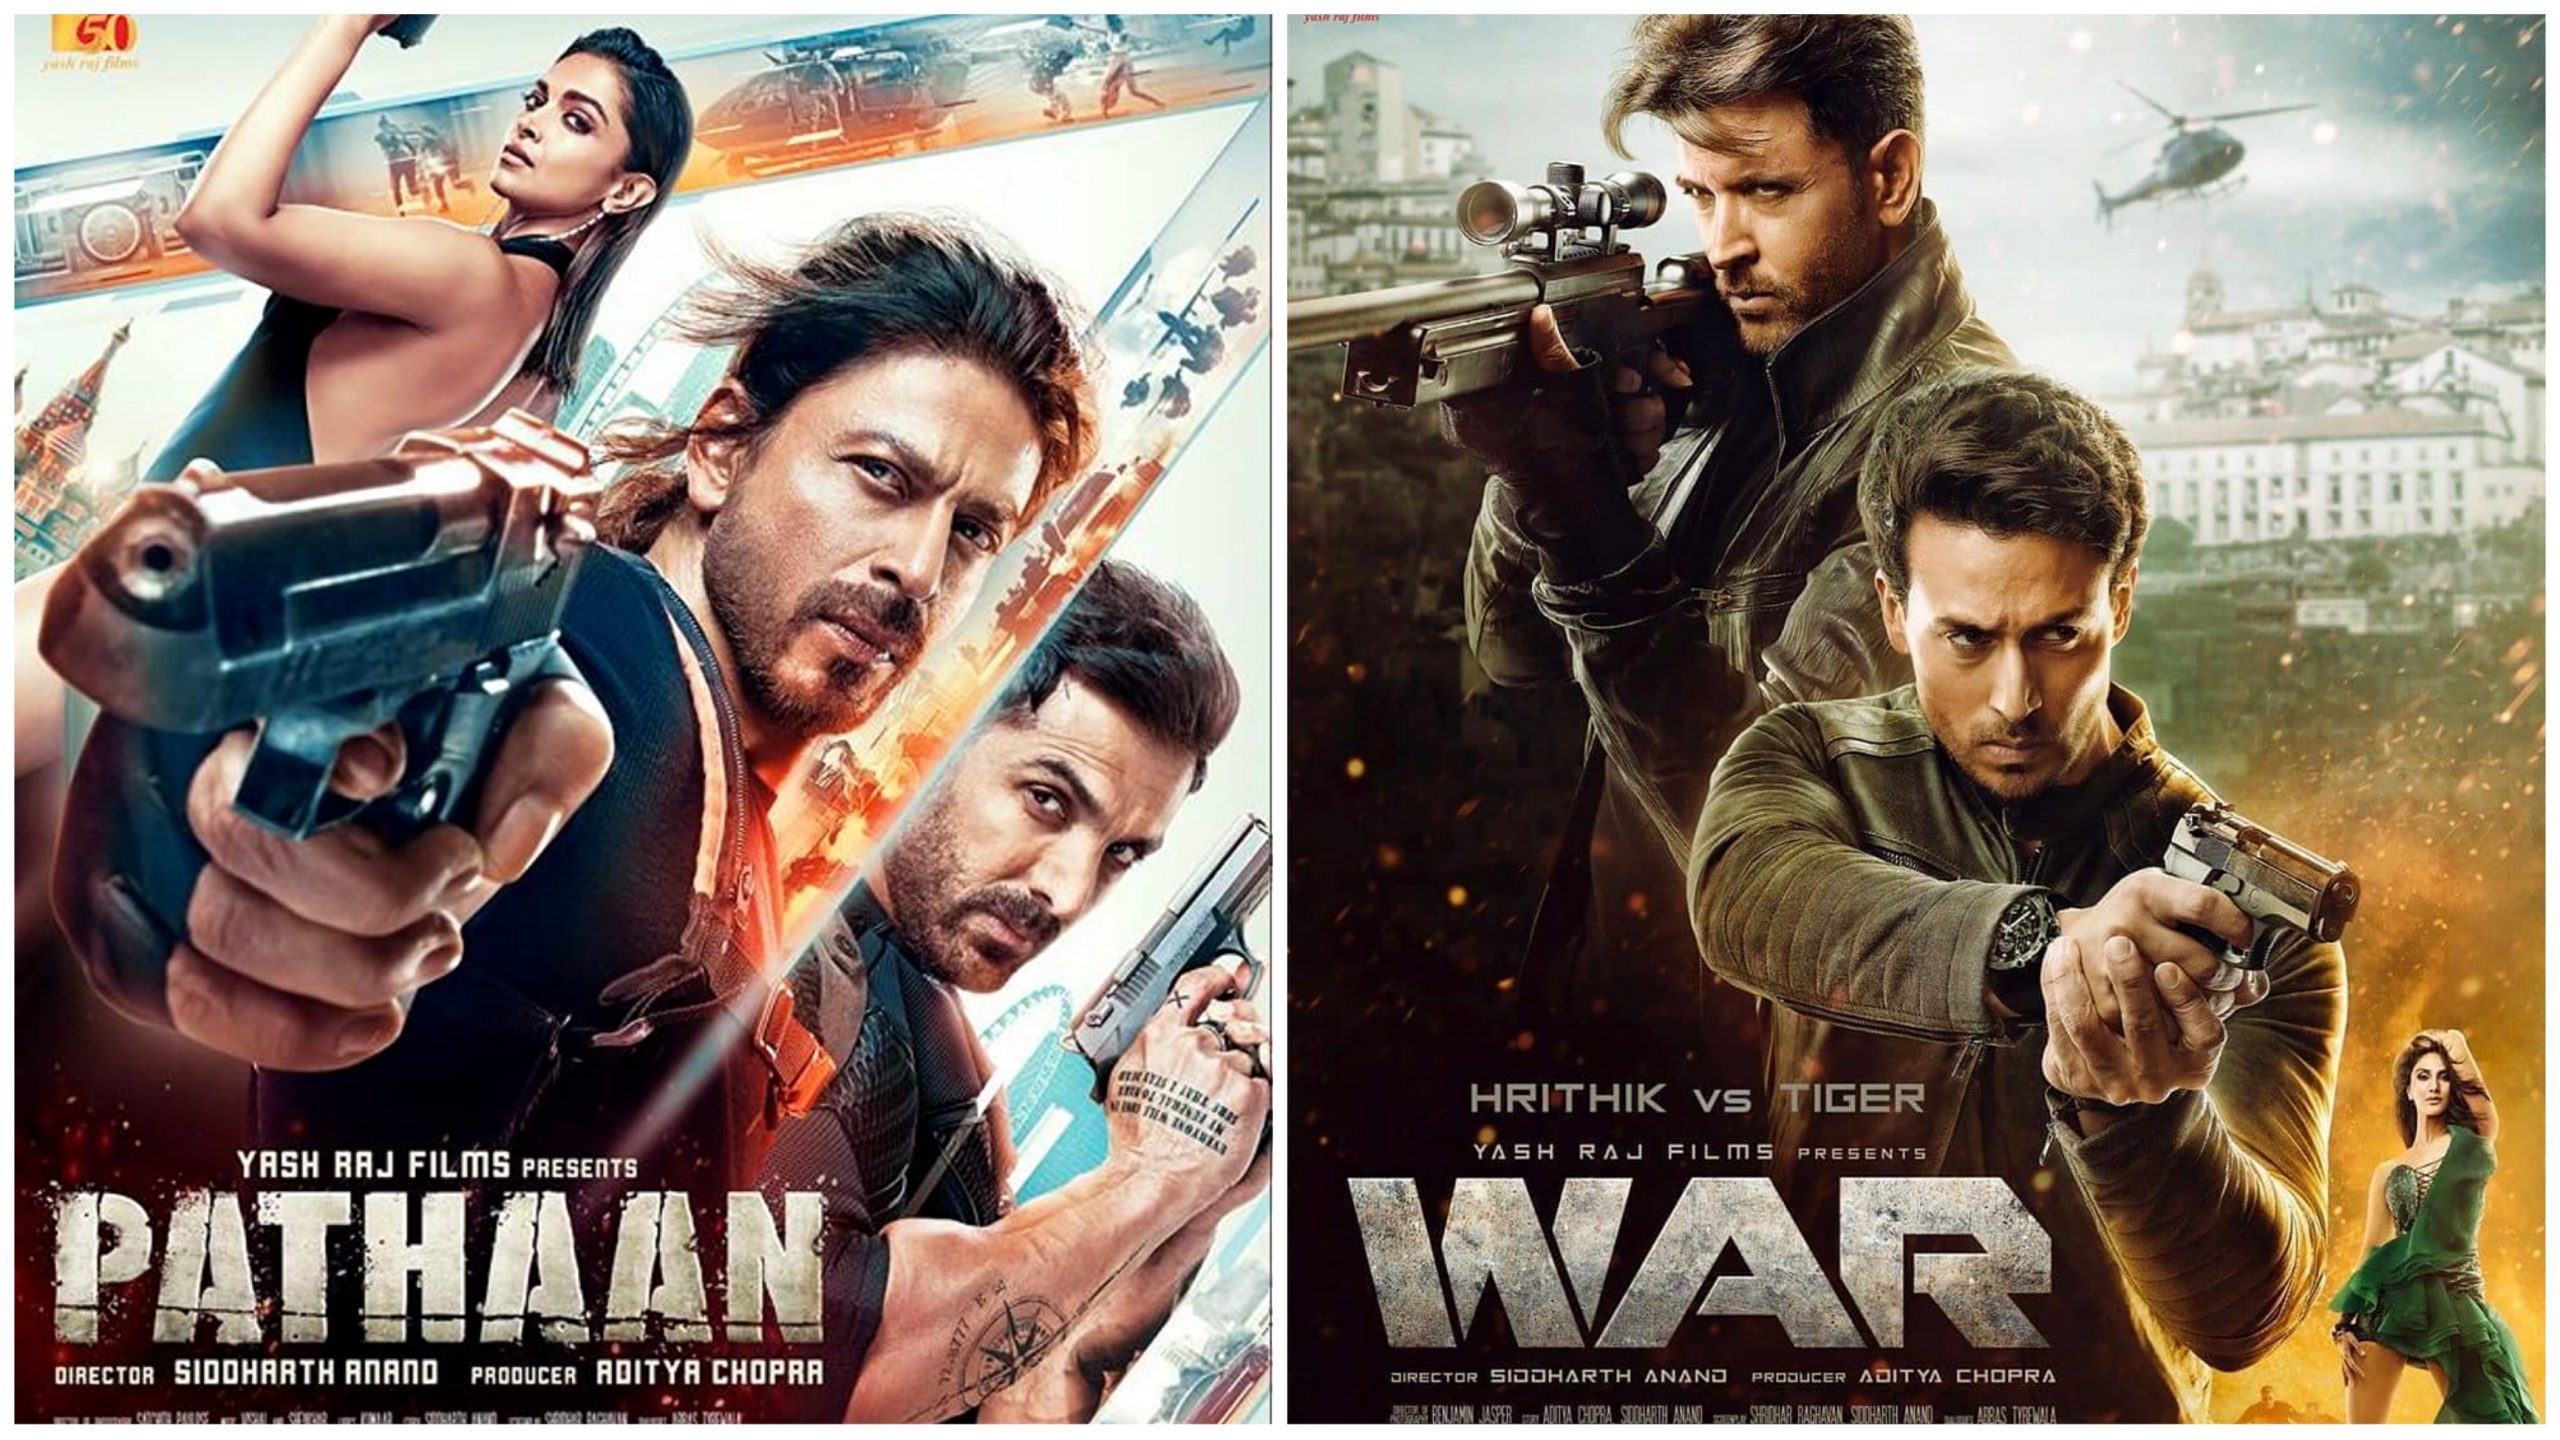 Fans draw connections between SRK’s Pathaan and Hrithik’s War: Watch HERE!